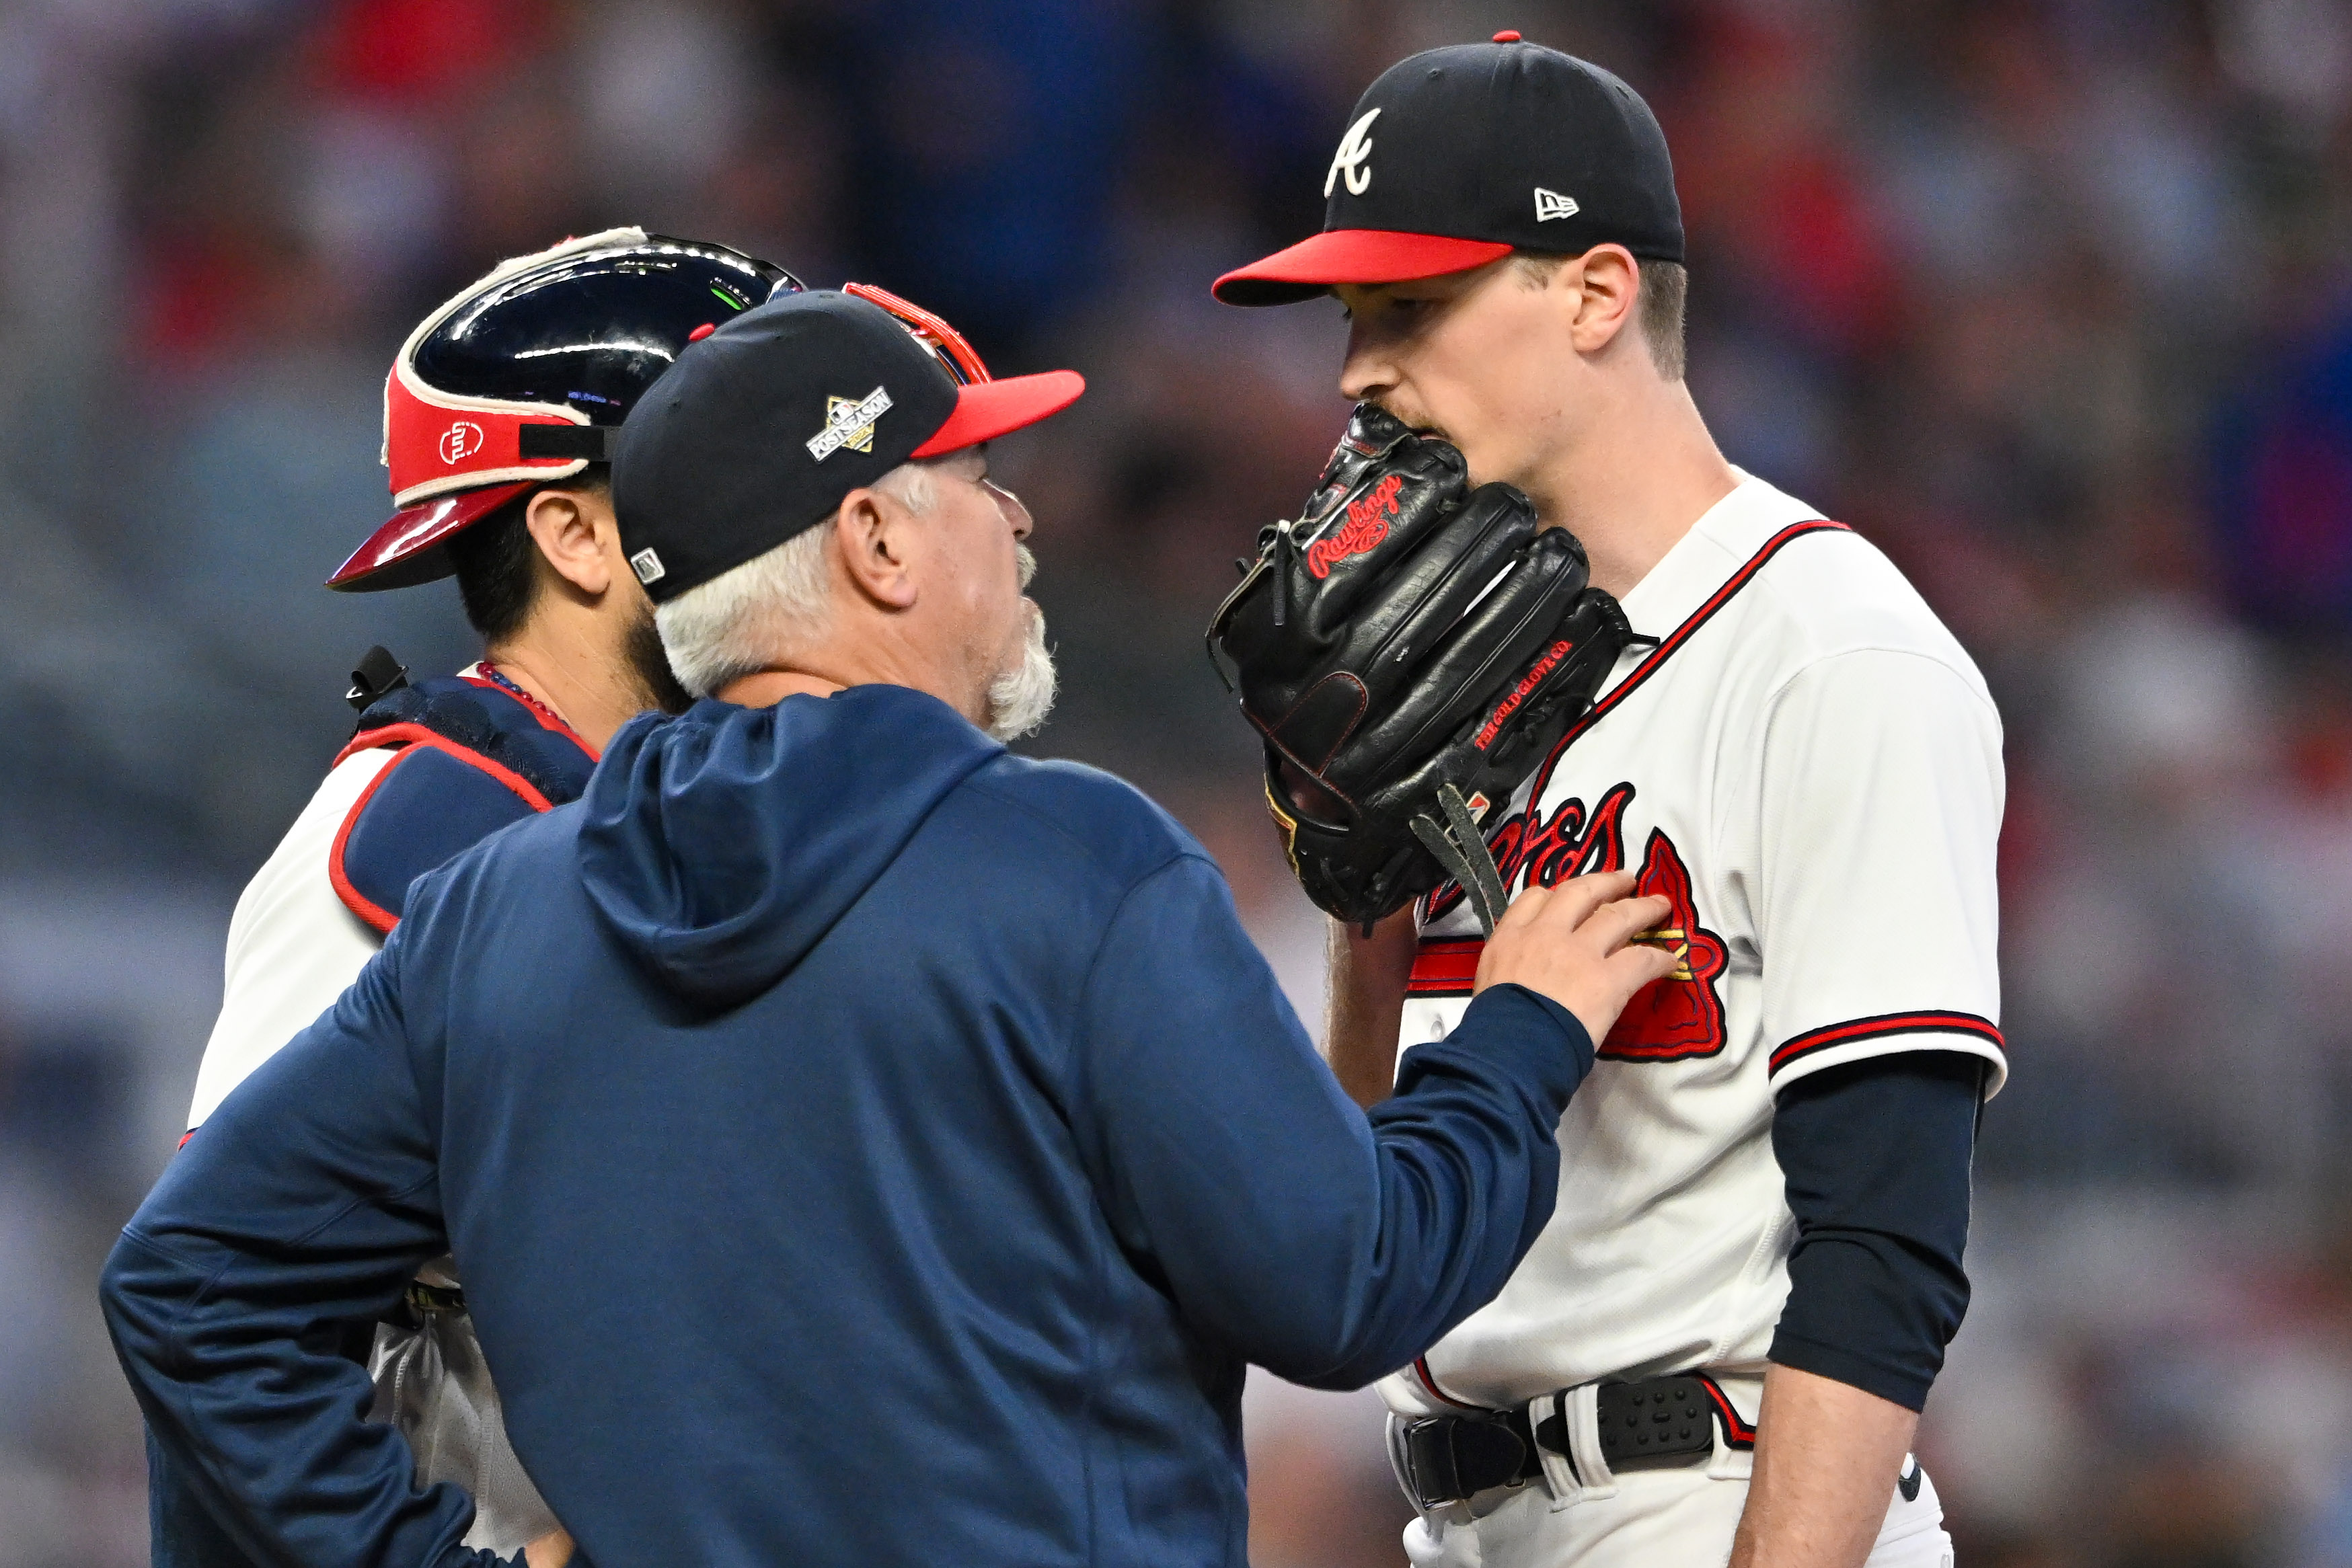 Rusty' Max Fried credits Braves teammates after his rough outing